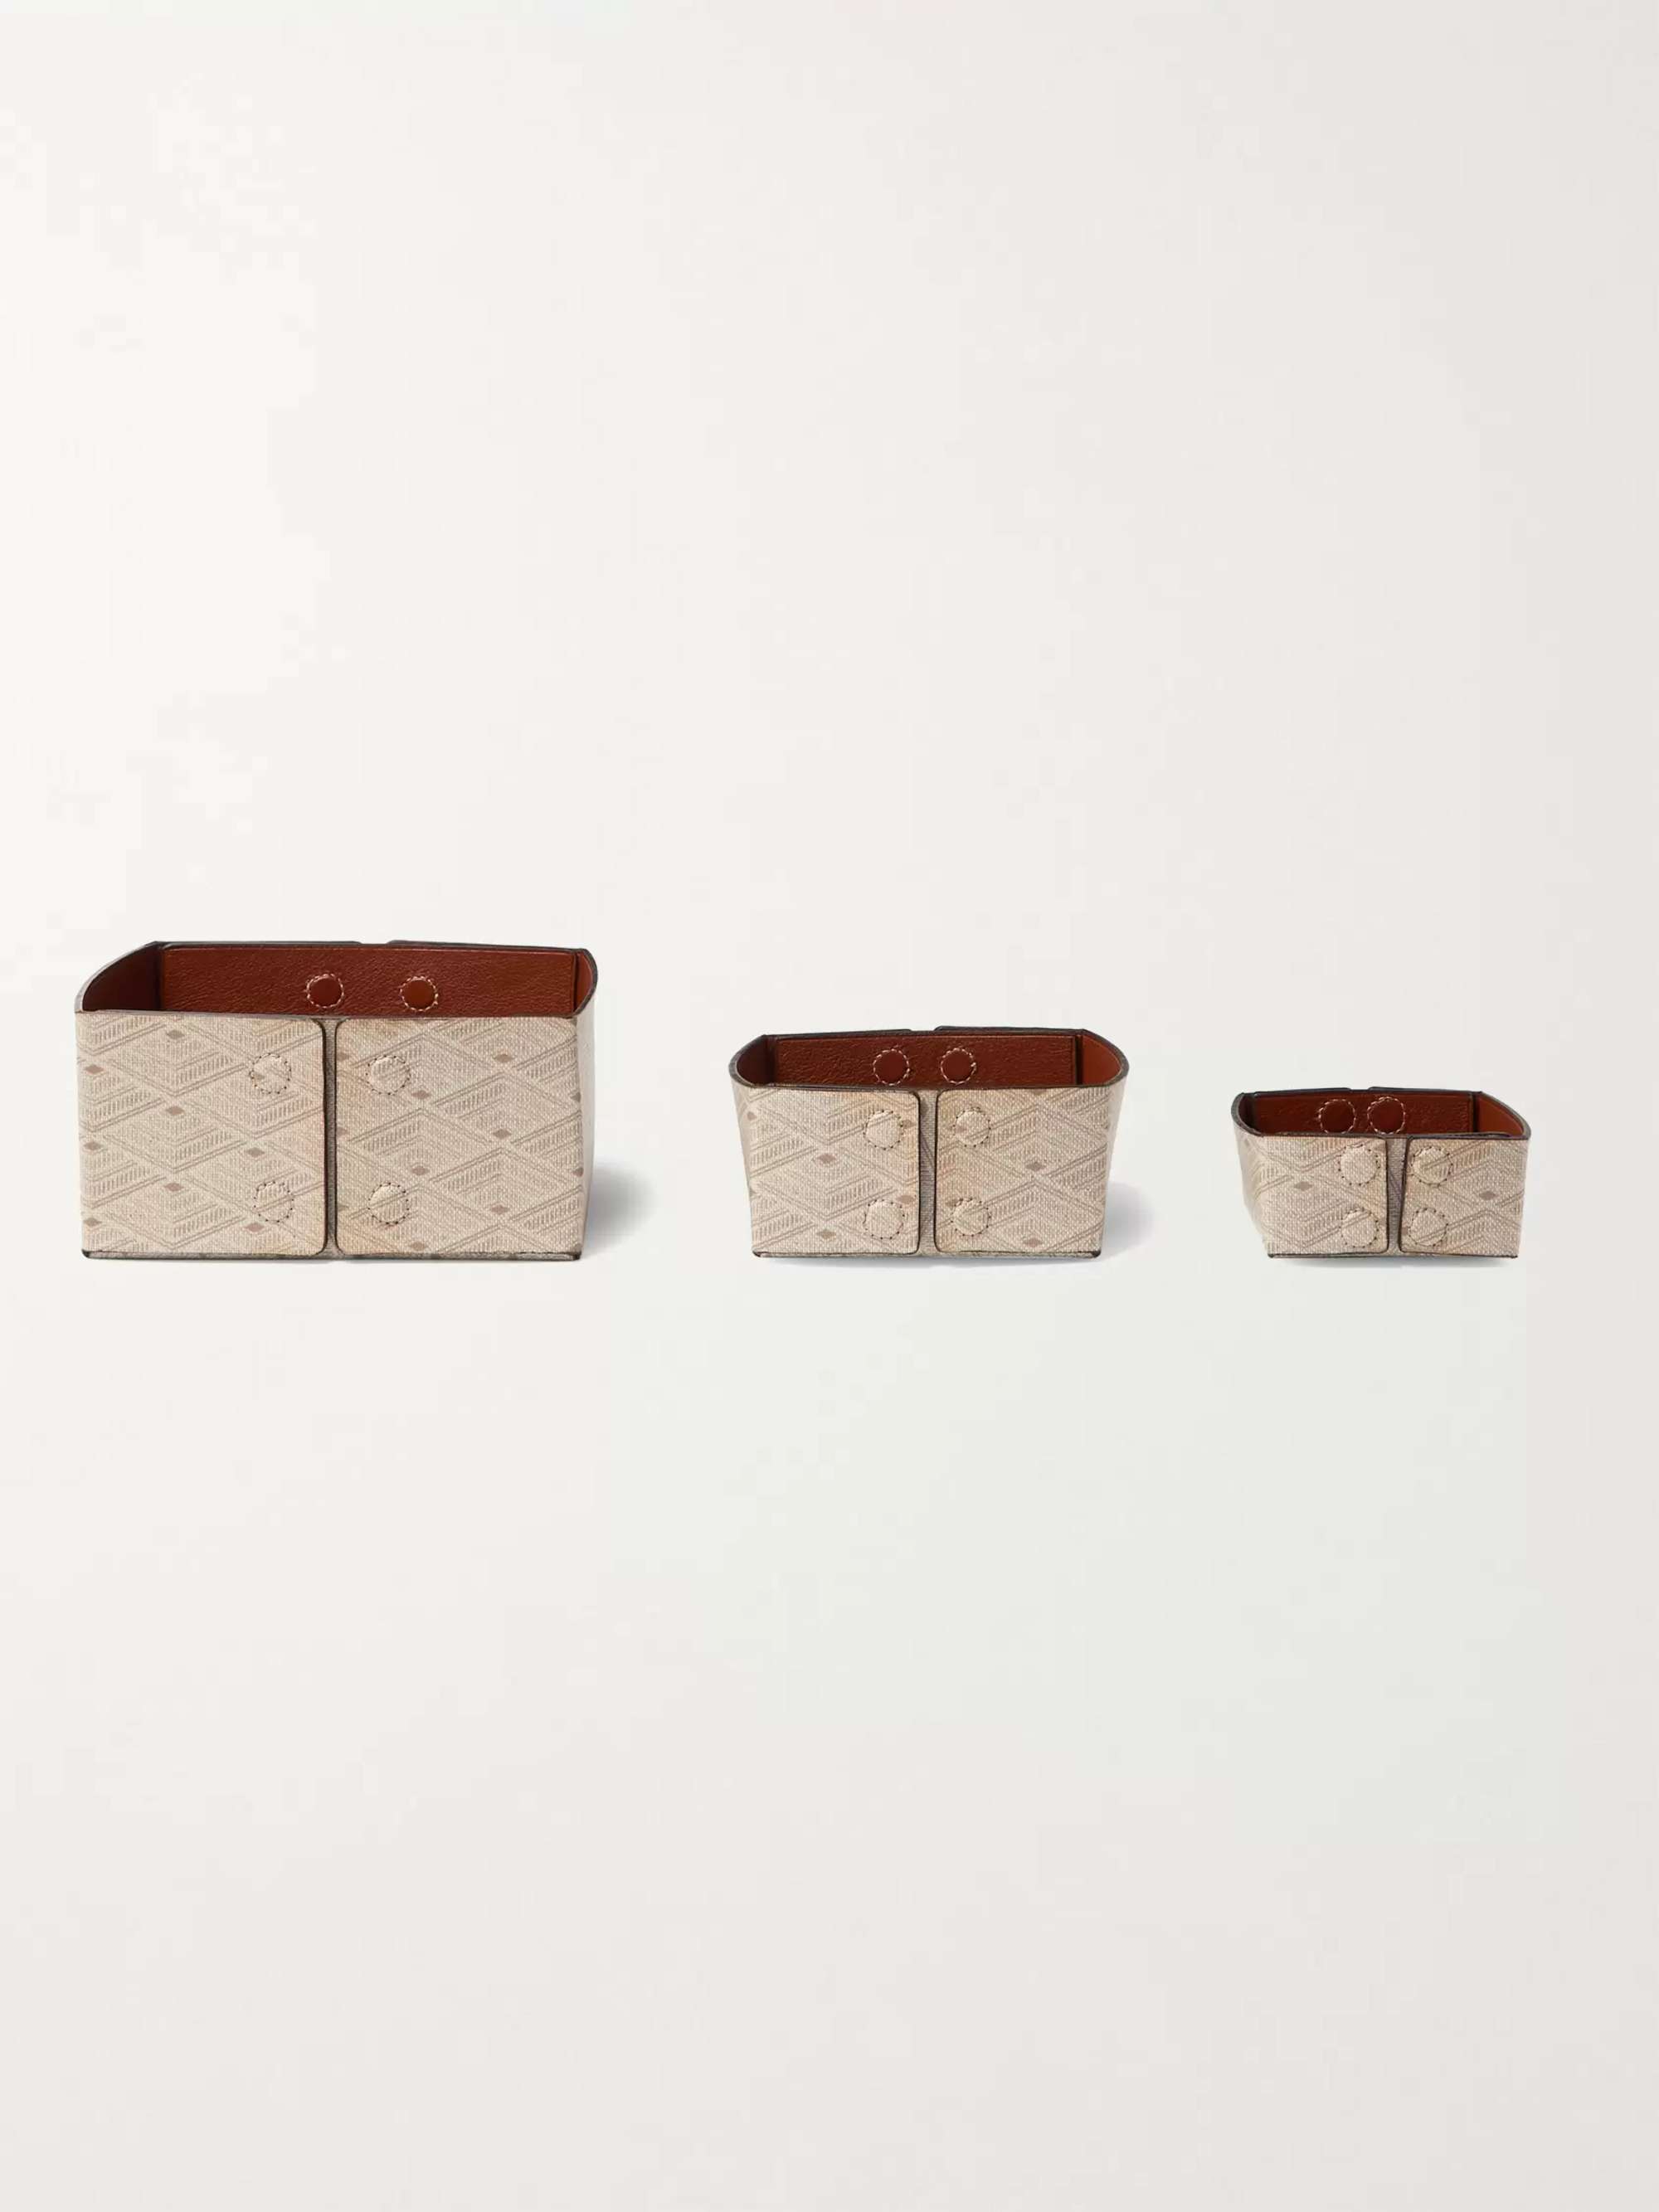 MÉTIER Set of Three Reversible Collapsible Printed Canvas and Leather Boxes